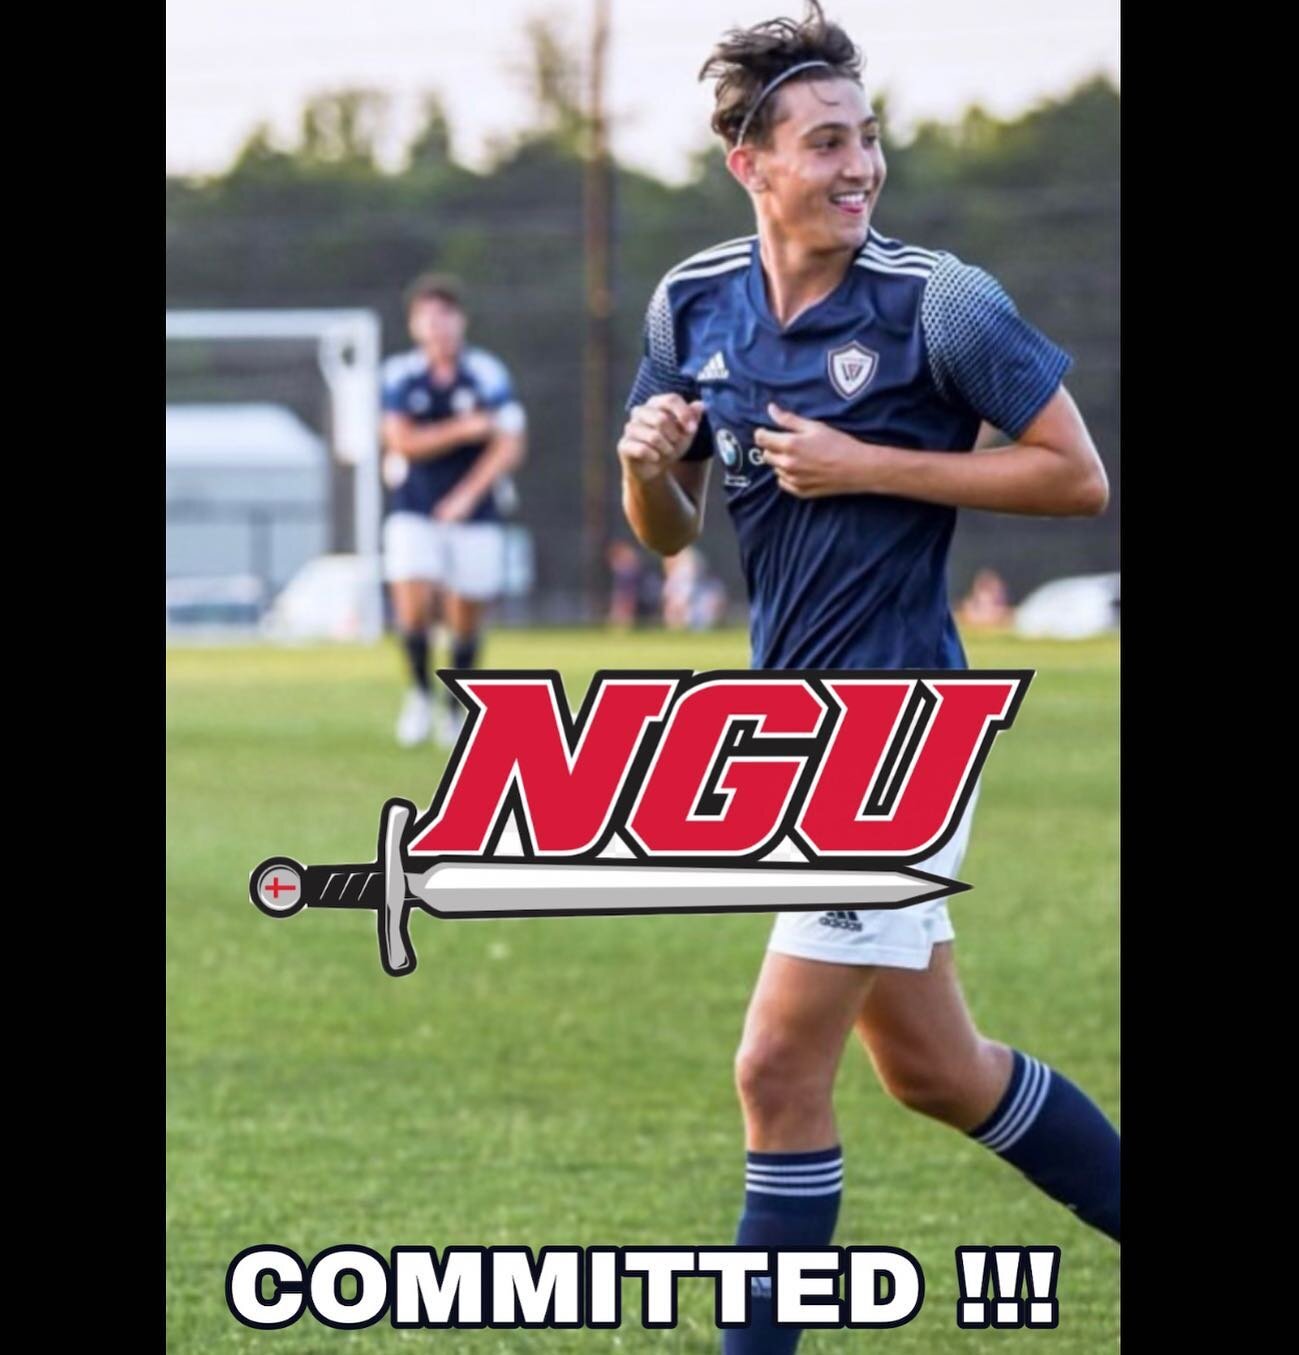 Our college commits continue to roll in this summer. Congratulations to Kieran Fields who committed to North Greenville University 💪🏼⚽️🎓 #1inSWFL #FLWestFC #SuccessisaChoice #bmwofnaples #sportsrecruits #college #nextlevel